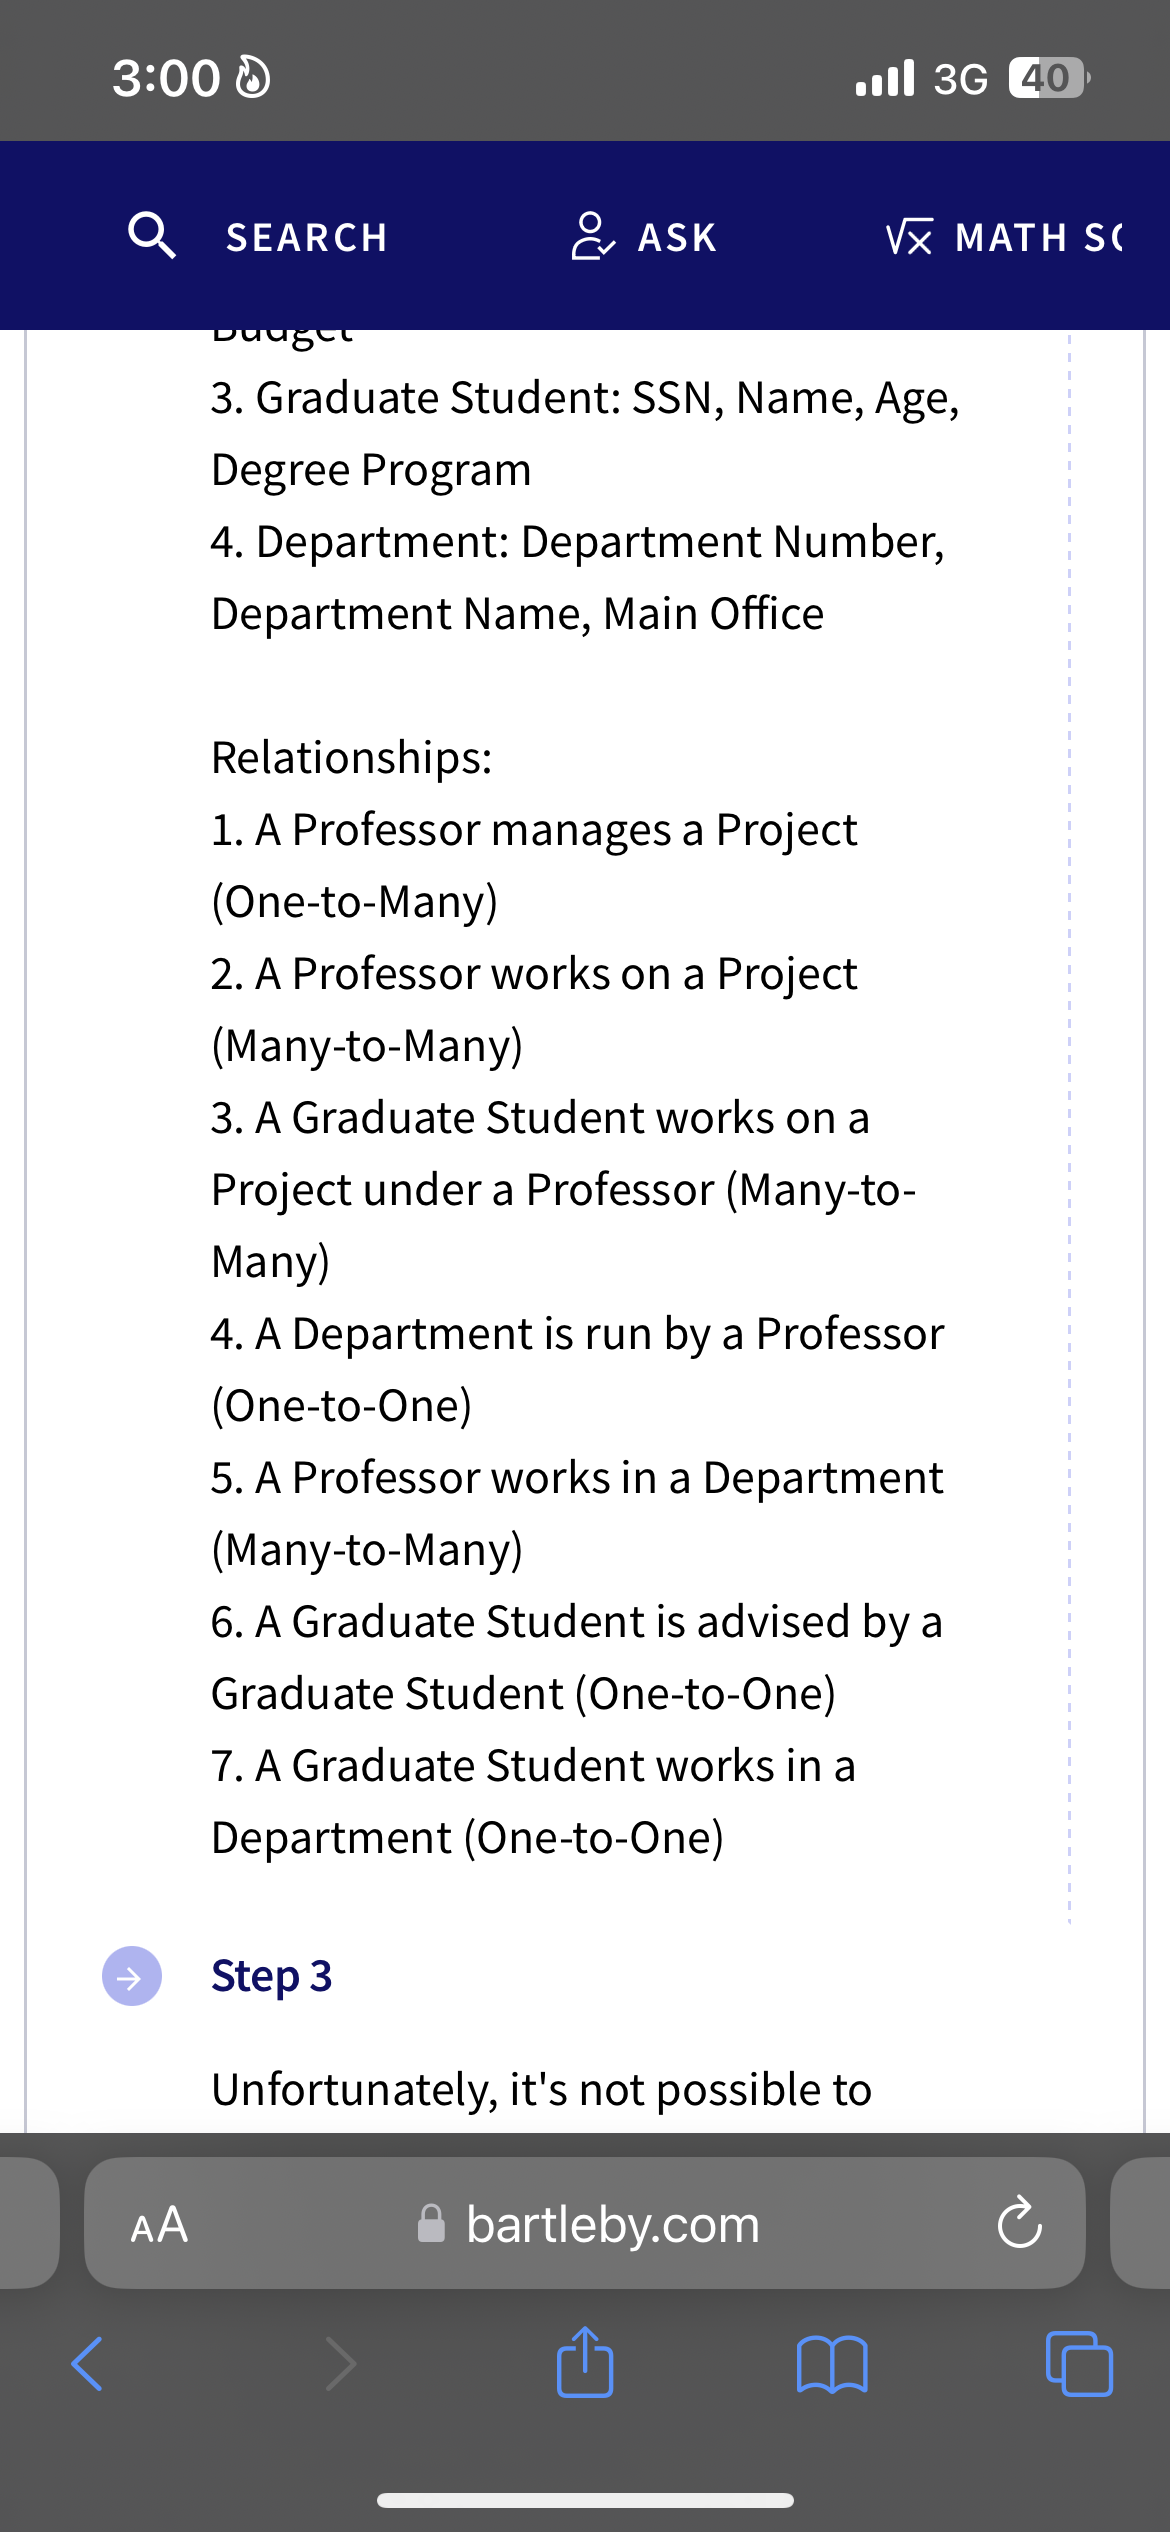 3:00
AA
SEARCH
Ill 3G 40
ASK
Vㄡ MATH SO
budget
3. Graduate Student: SSN, Name, Age,
Degree Program
4. Department: Department Number,
Department Name, Main Office
Relationships:
1. A Professor manages a Project
(One-to-Many)
2. A Professor works on a Project
(Many-to-Many)
3. A Graduate Student works on a
Project under a Professor (Many-to-
Many)
4. A Department is run by a Professor
(One-to-One)
5. A Professor works in a Department
(Many-to-Many)
6. A Graduate Student is advised by a
Graduate Student (One-to-One)
7. A Graduate Student works in a
Department (One-to-One)
Step 3
Unfortunately, it's not possible to
bartleby.com
↑